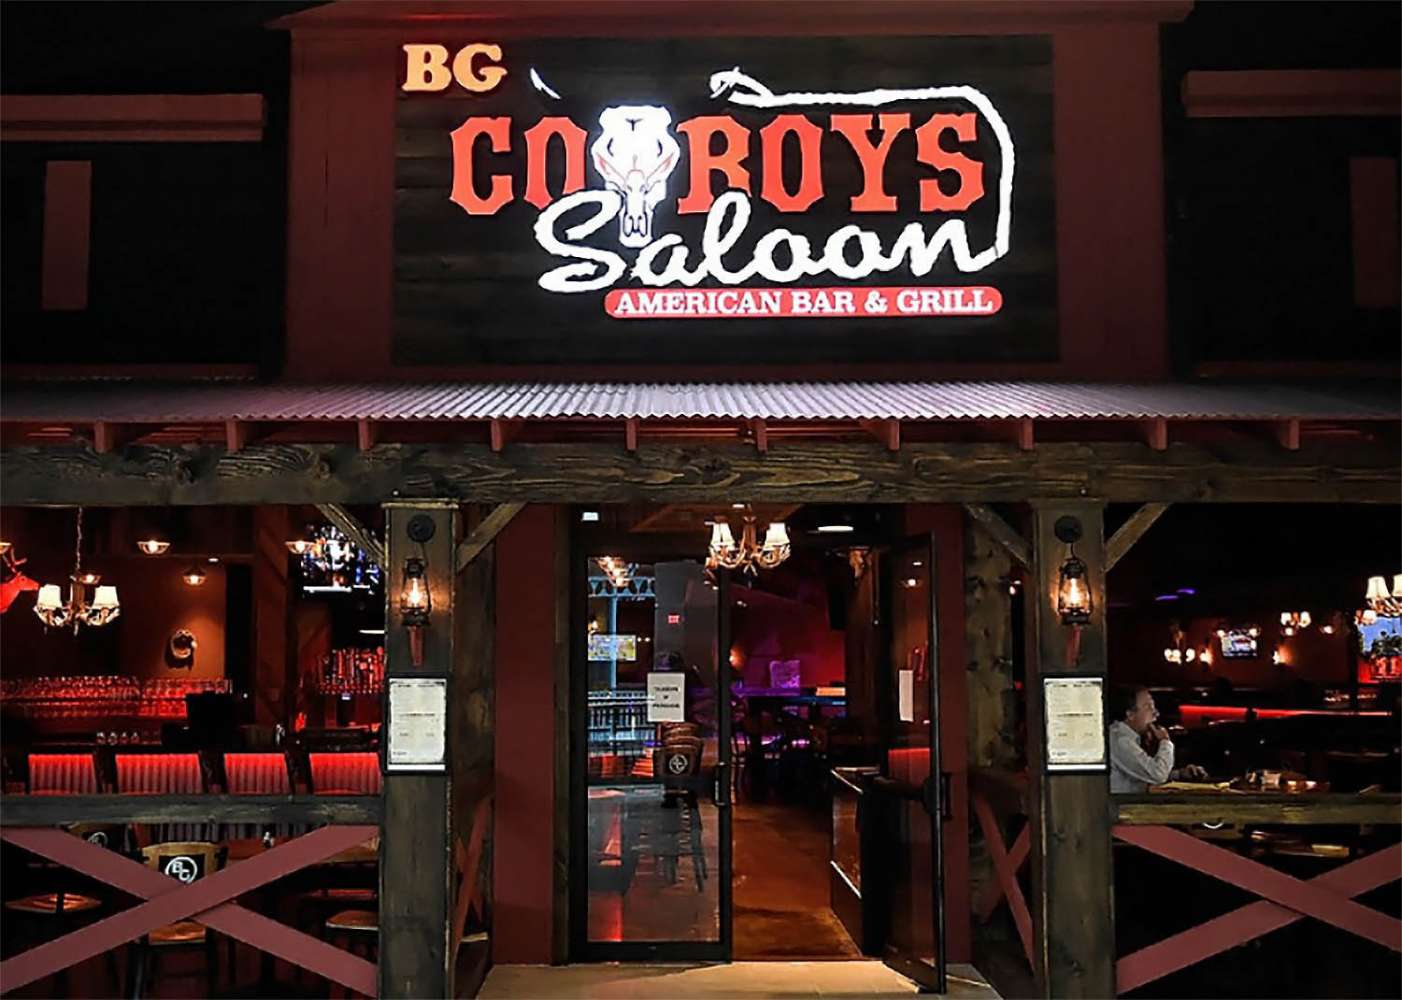 Cowboys Saloon has opened strategic locations throughout the country